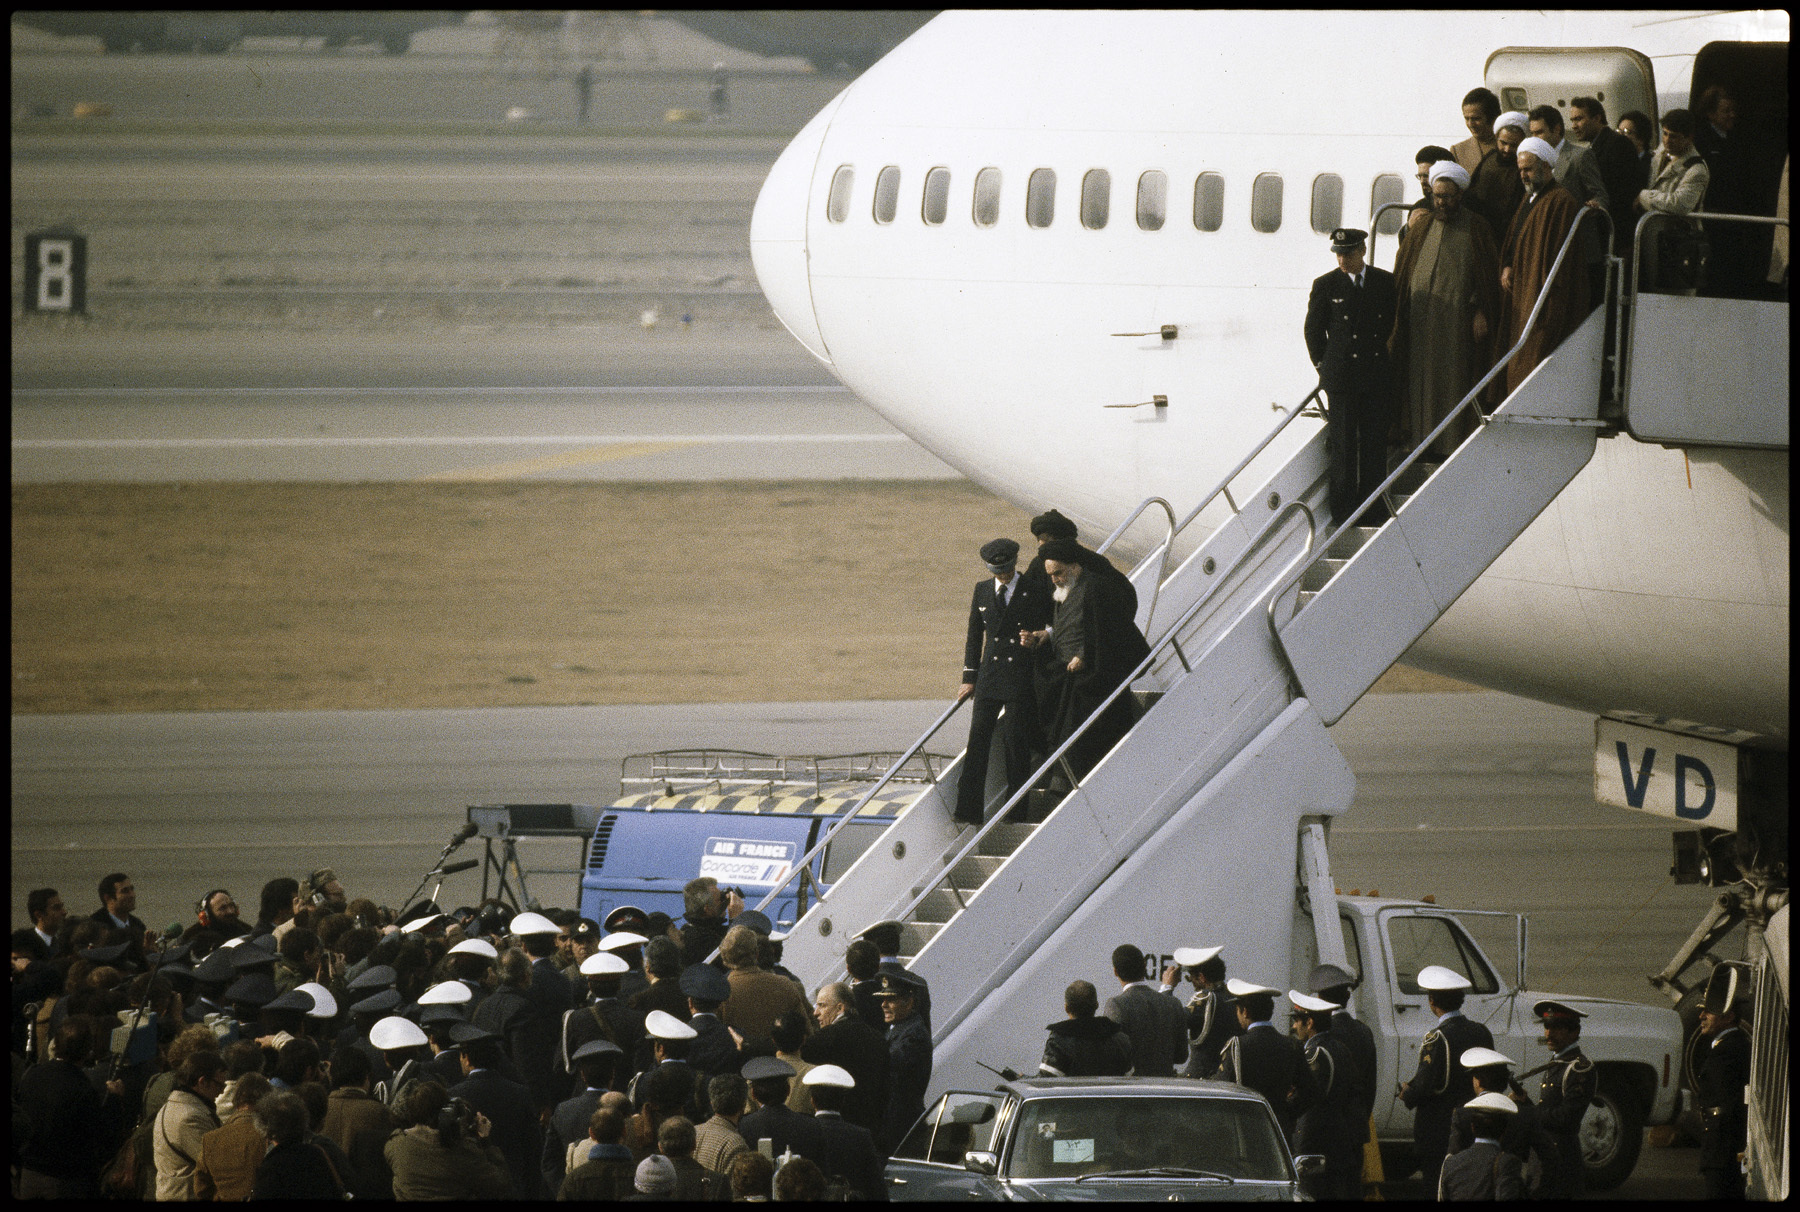 Ayatollah Khomeini arrives in Tehran on Air France, to an uncertain future.